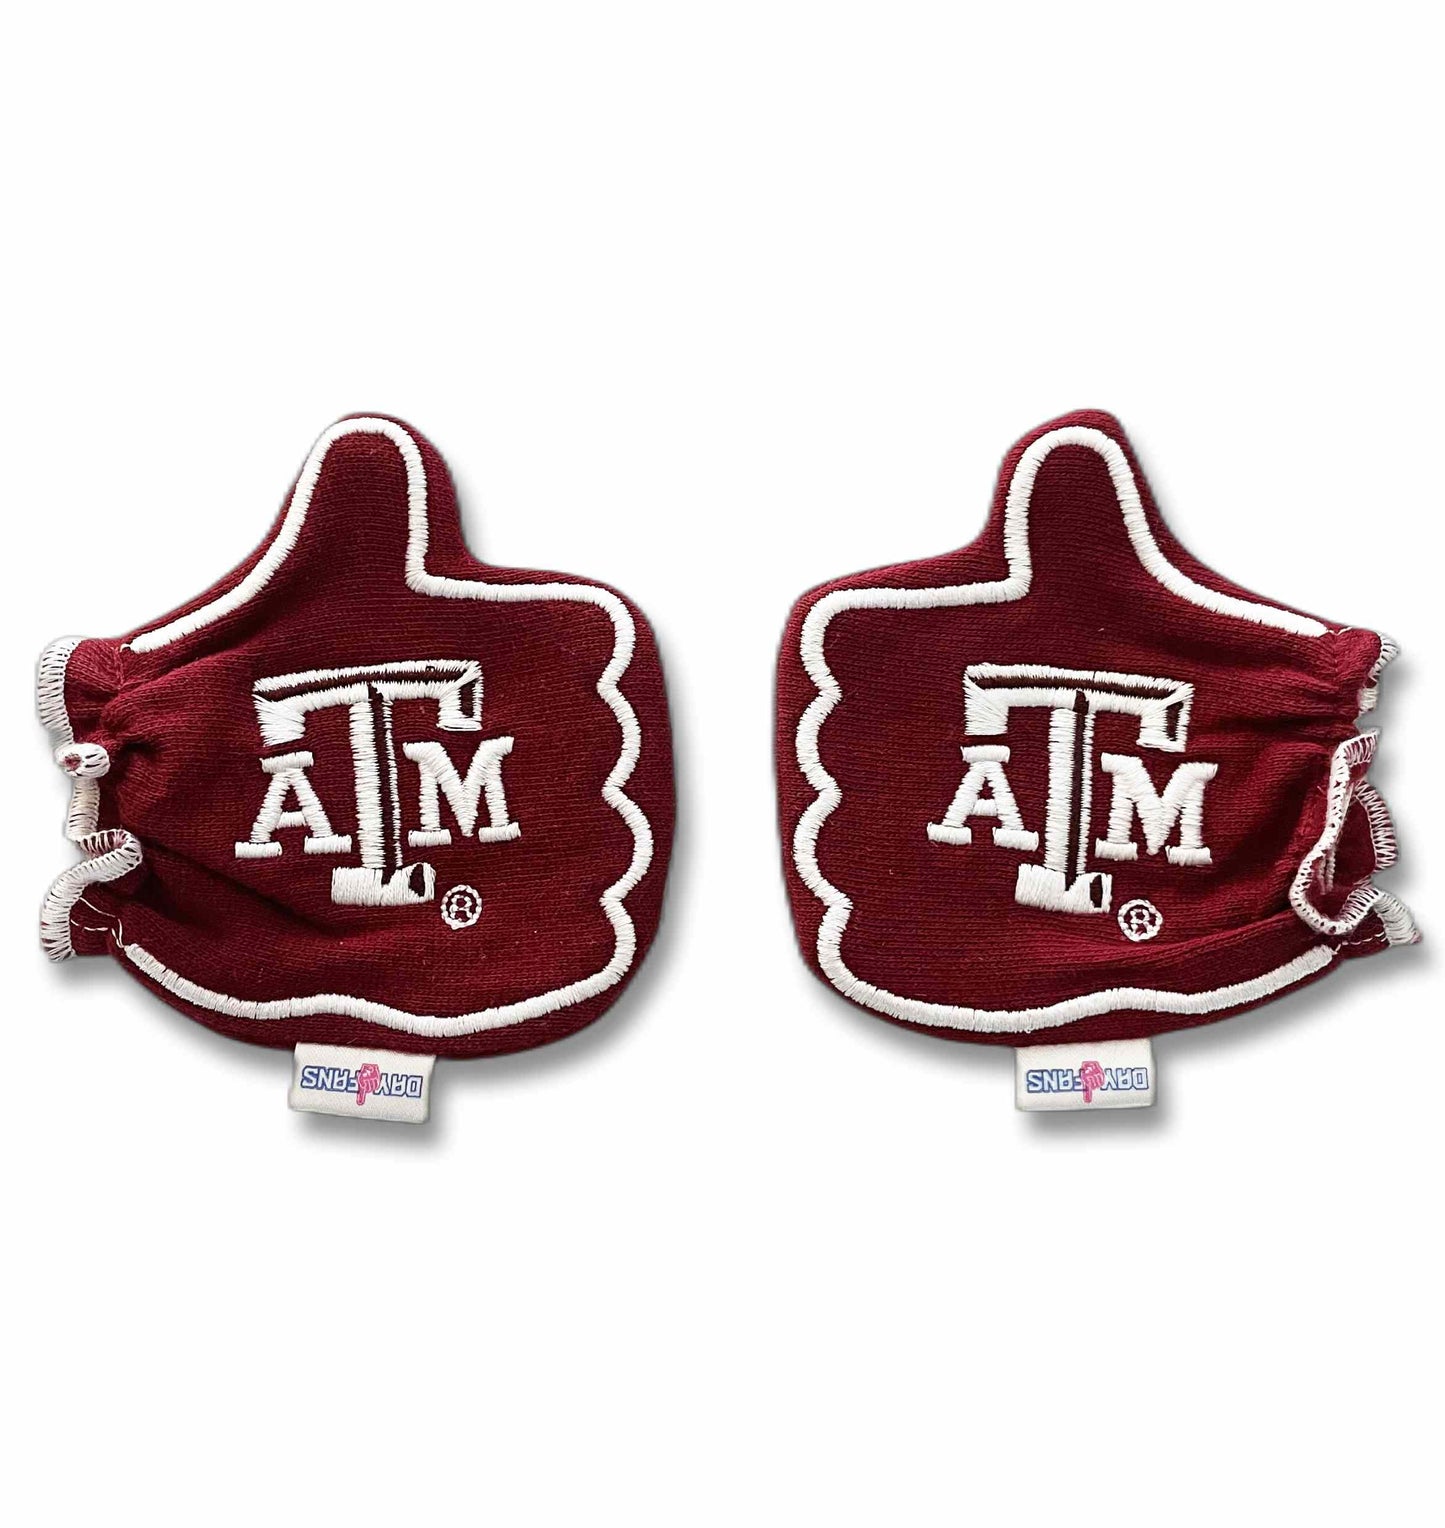 Texas A&M Gig Em FanMitts Baby Mittens Maroon Back Pair